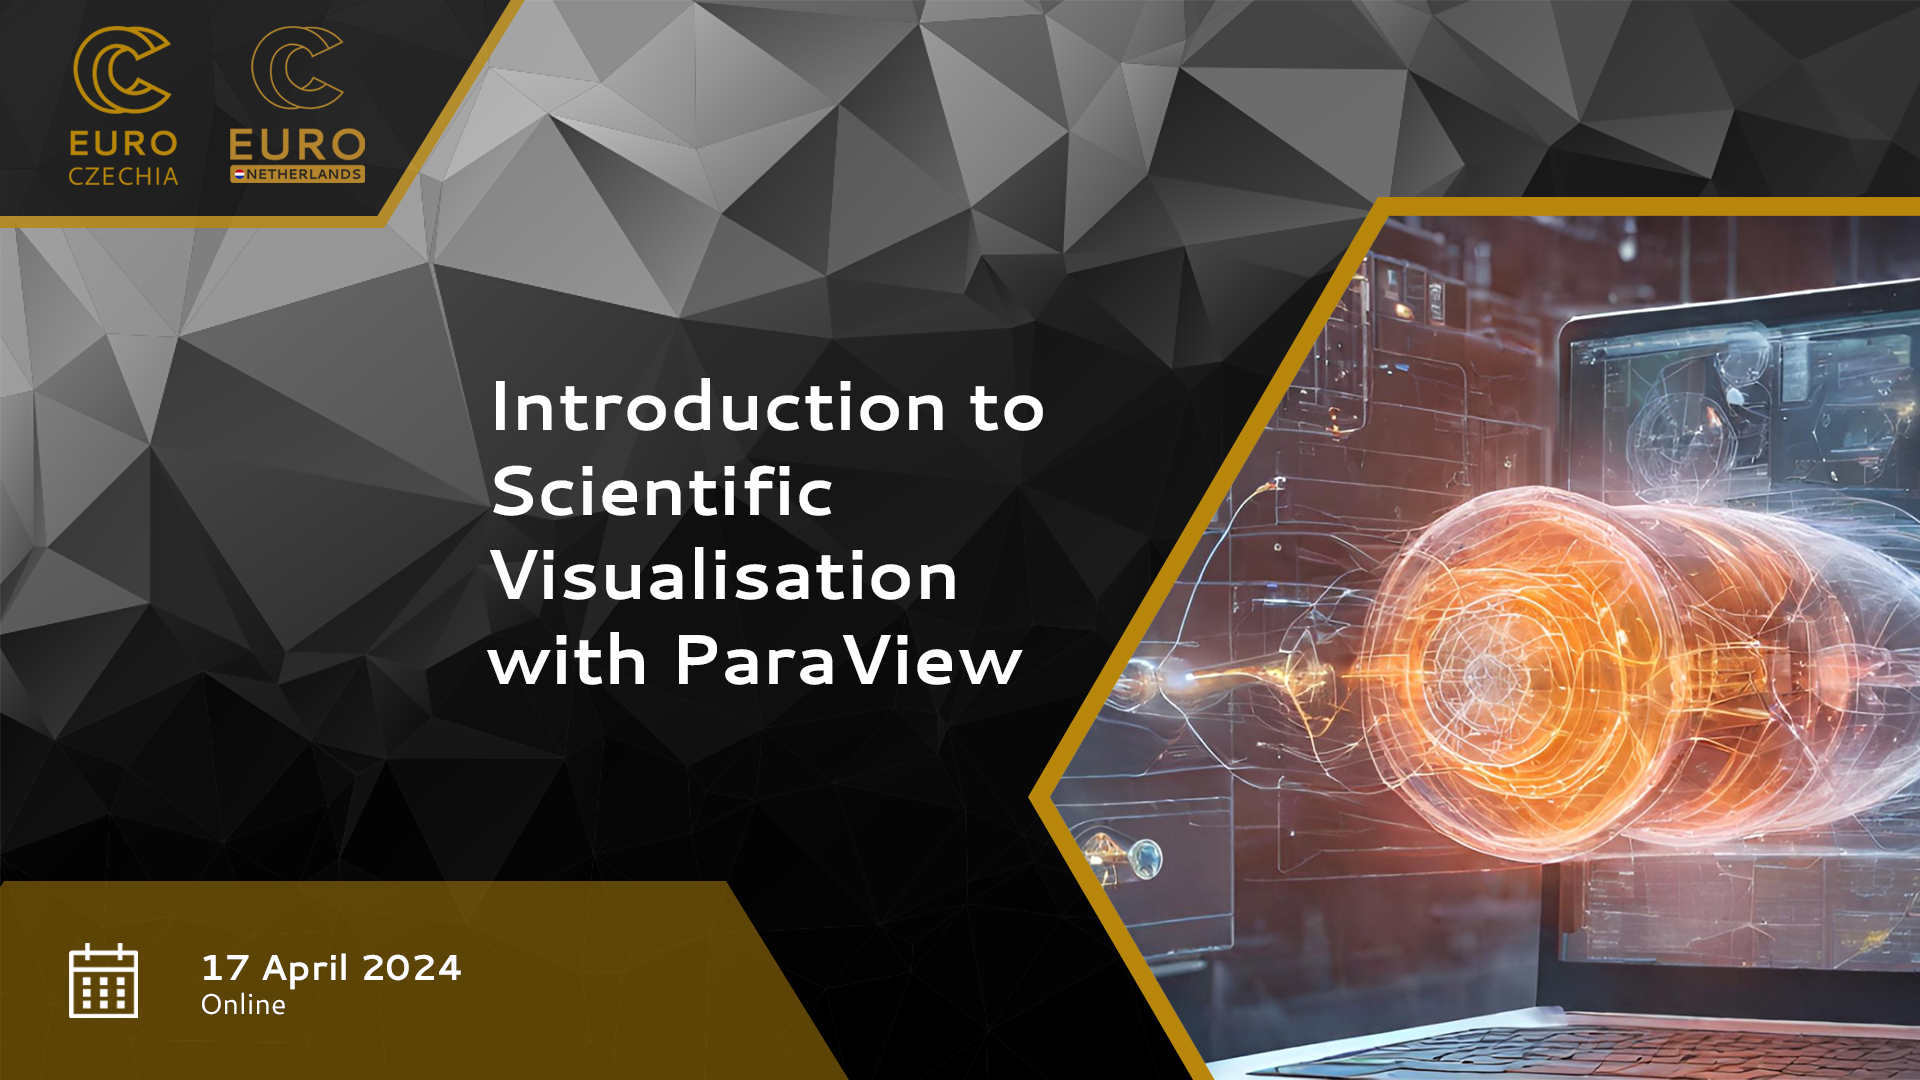 Banner_Introduction_to_Scientific_Visualization_with_ParaView_1920x1080_WEB